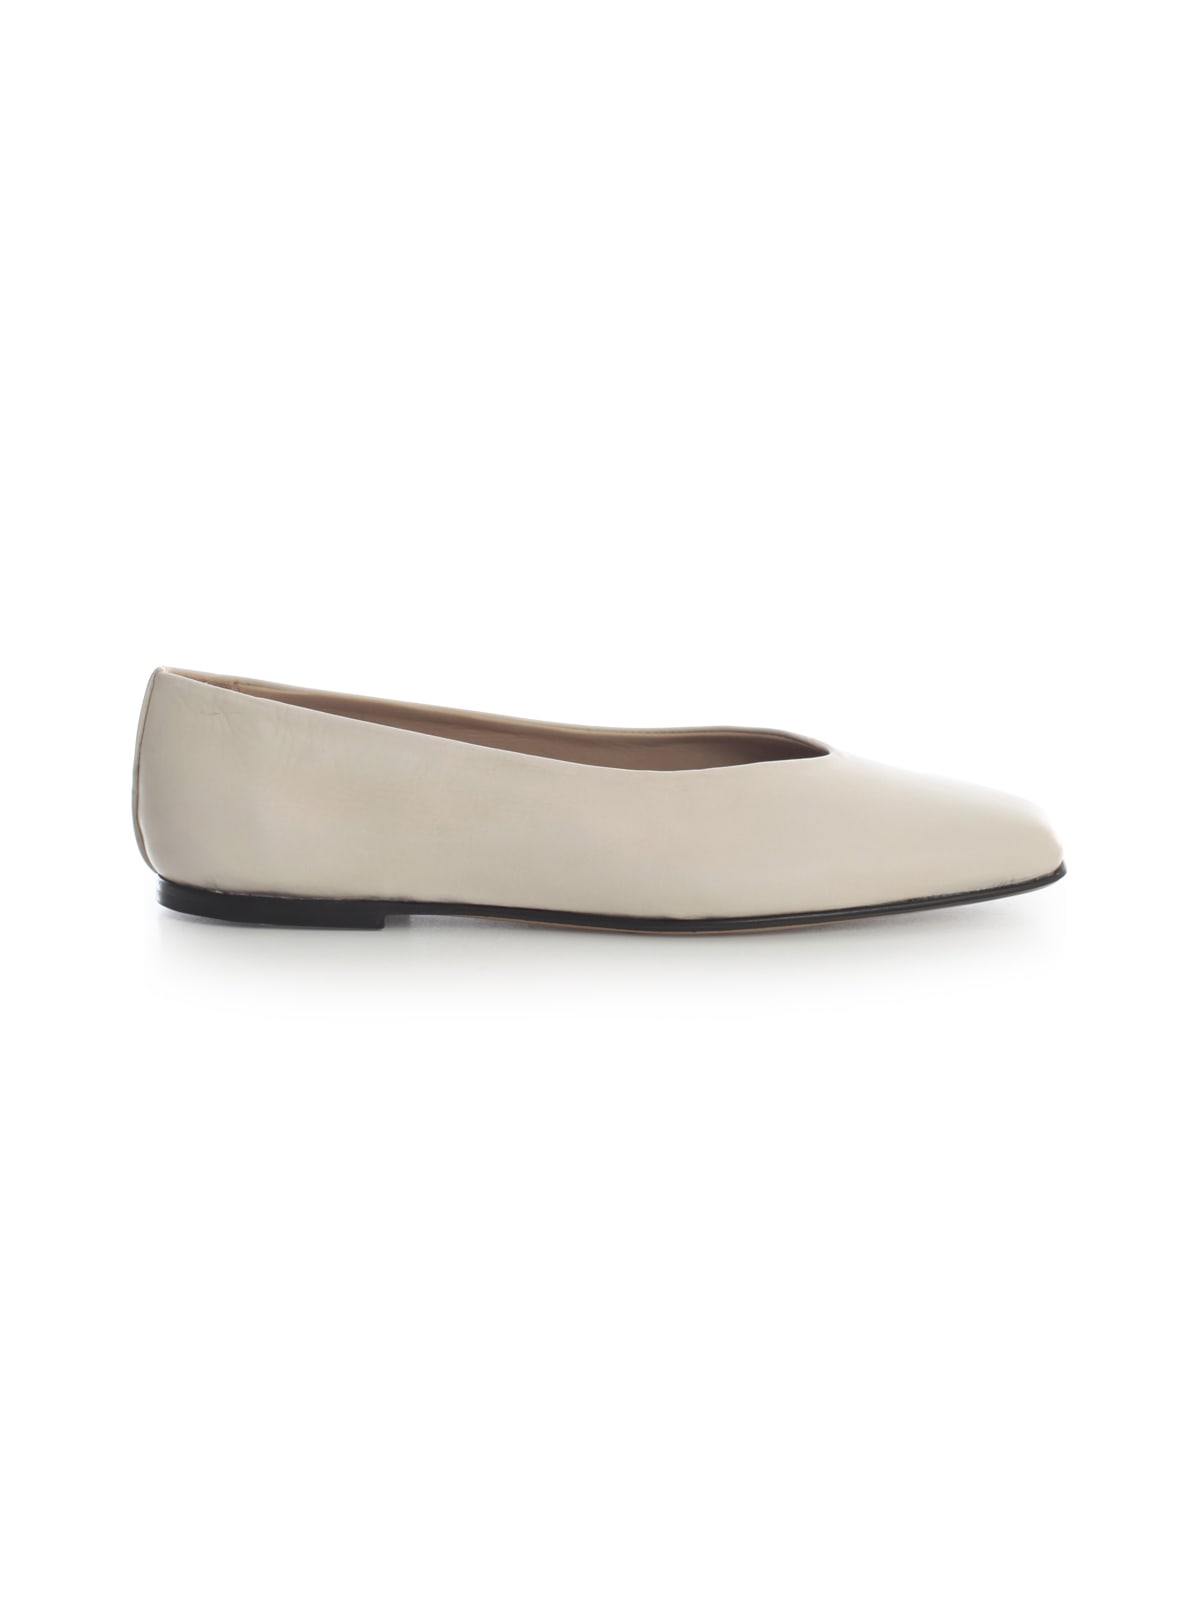 PAUL SMITH WOMENS SHOE GRACE OFF WHITE,W1SGRC01FCLF 02 OFFWH